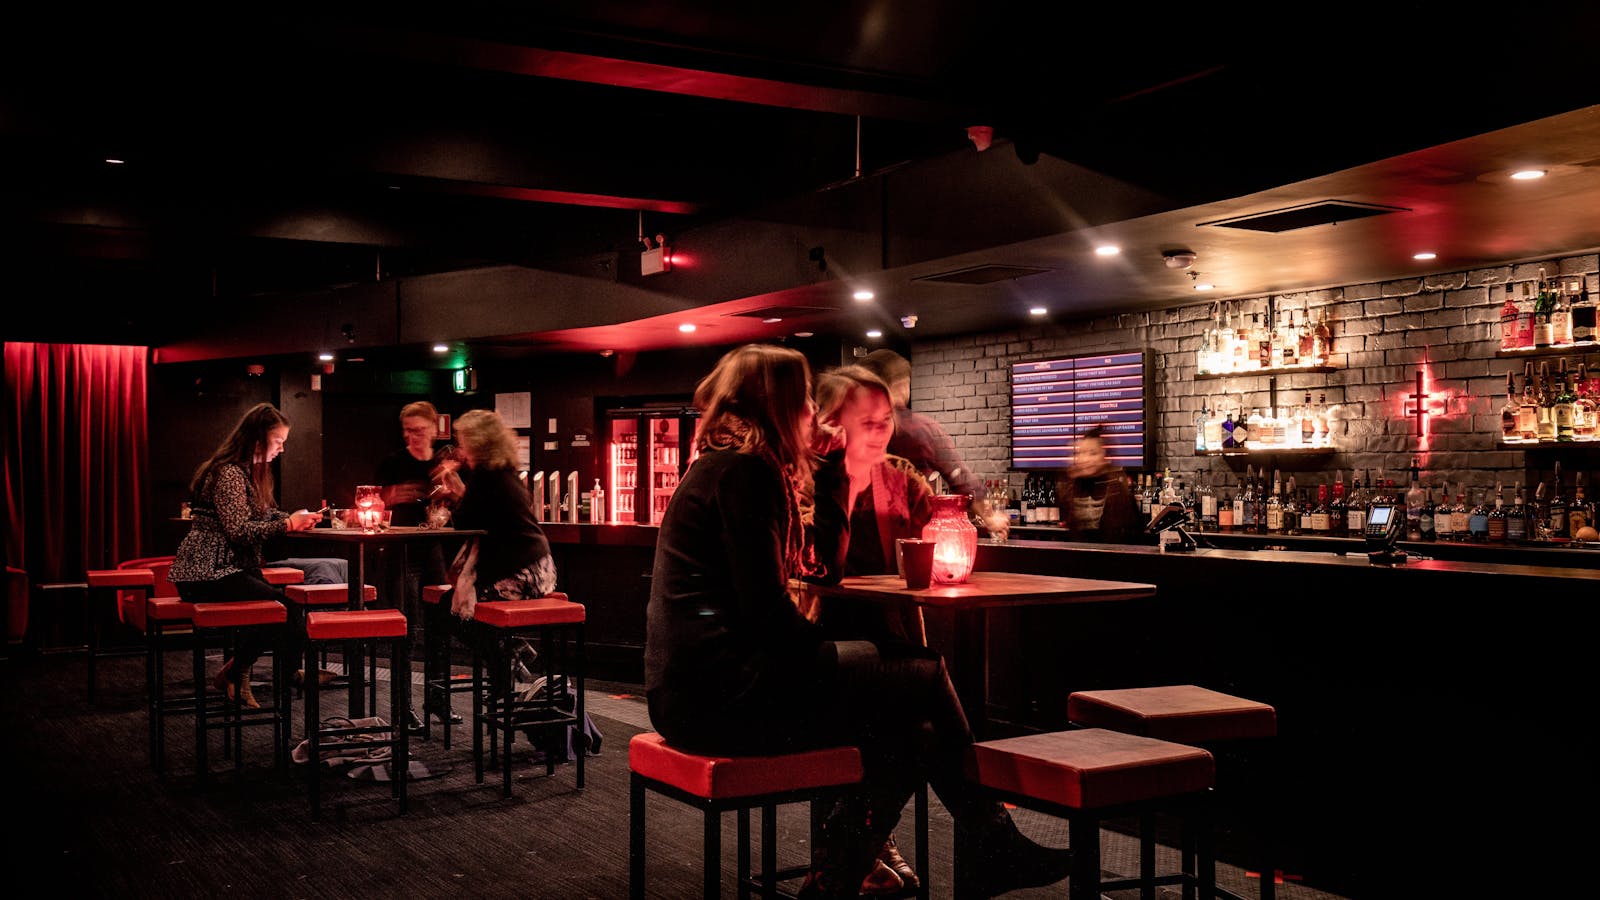 Altar's bandroom lounge bar is a perfect place to catch up with friends and share a drink